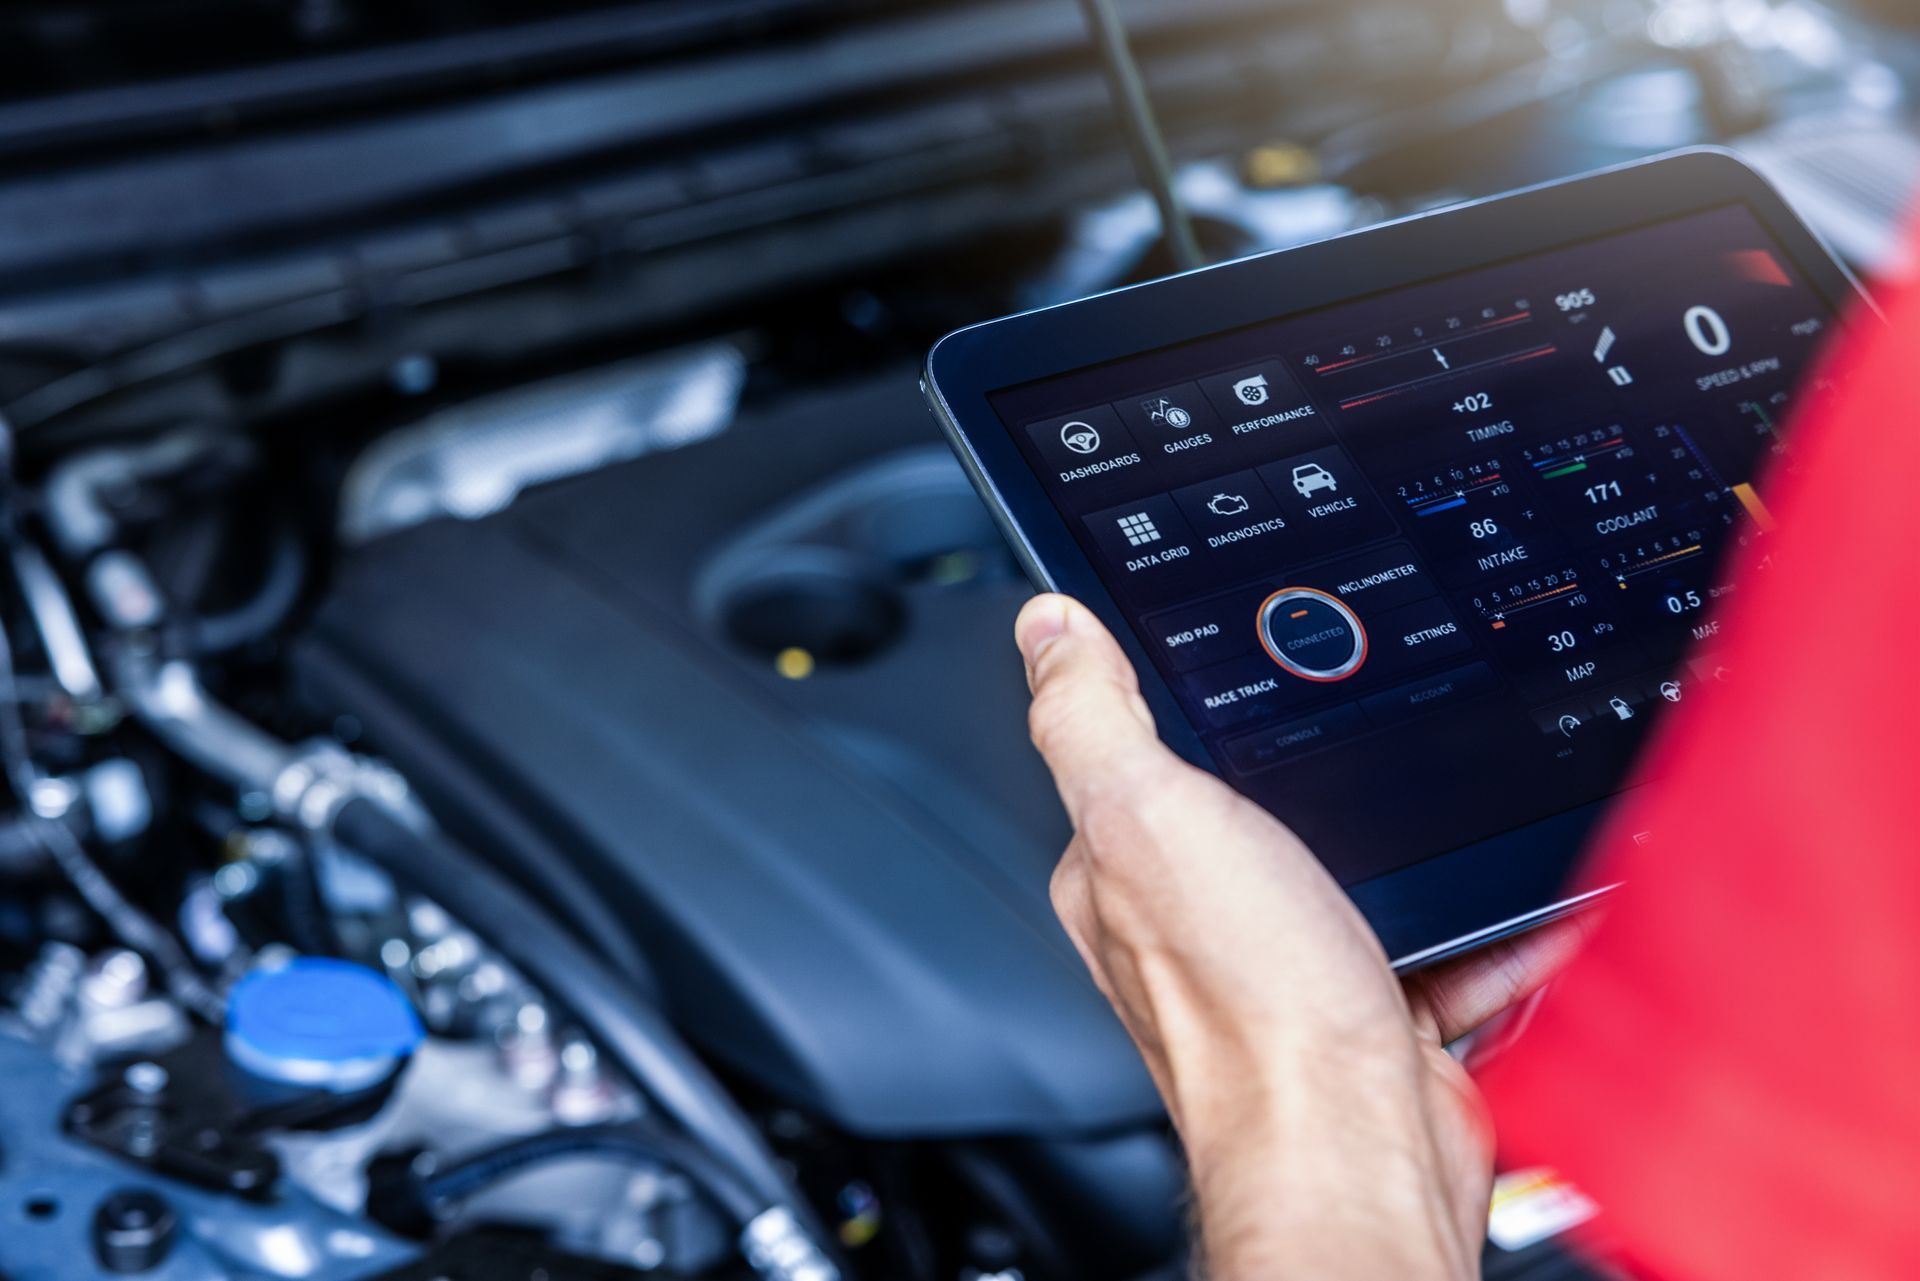 Digital Inspections at ﻿Terry's Automotive Group﻿ in ﻿Olympia, WA﻿